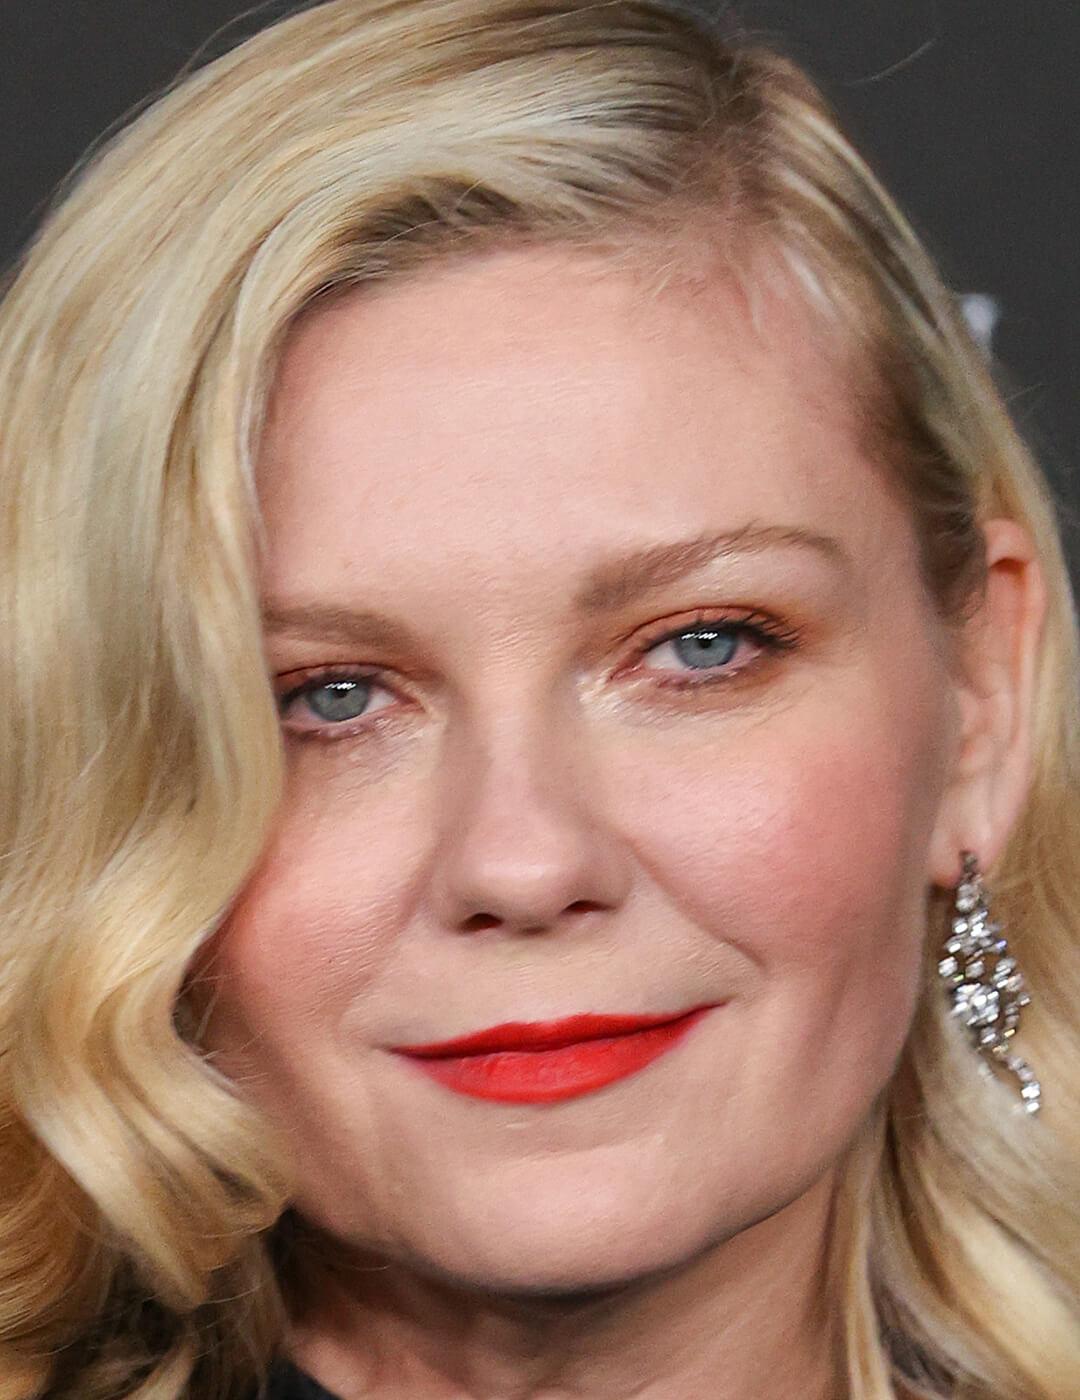 Kirsten Dunst rocking a monochromatic makeup look on the red carpet